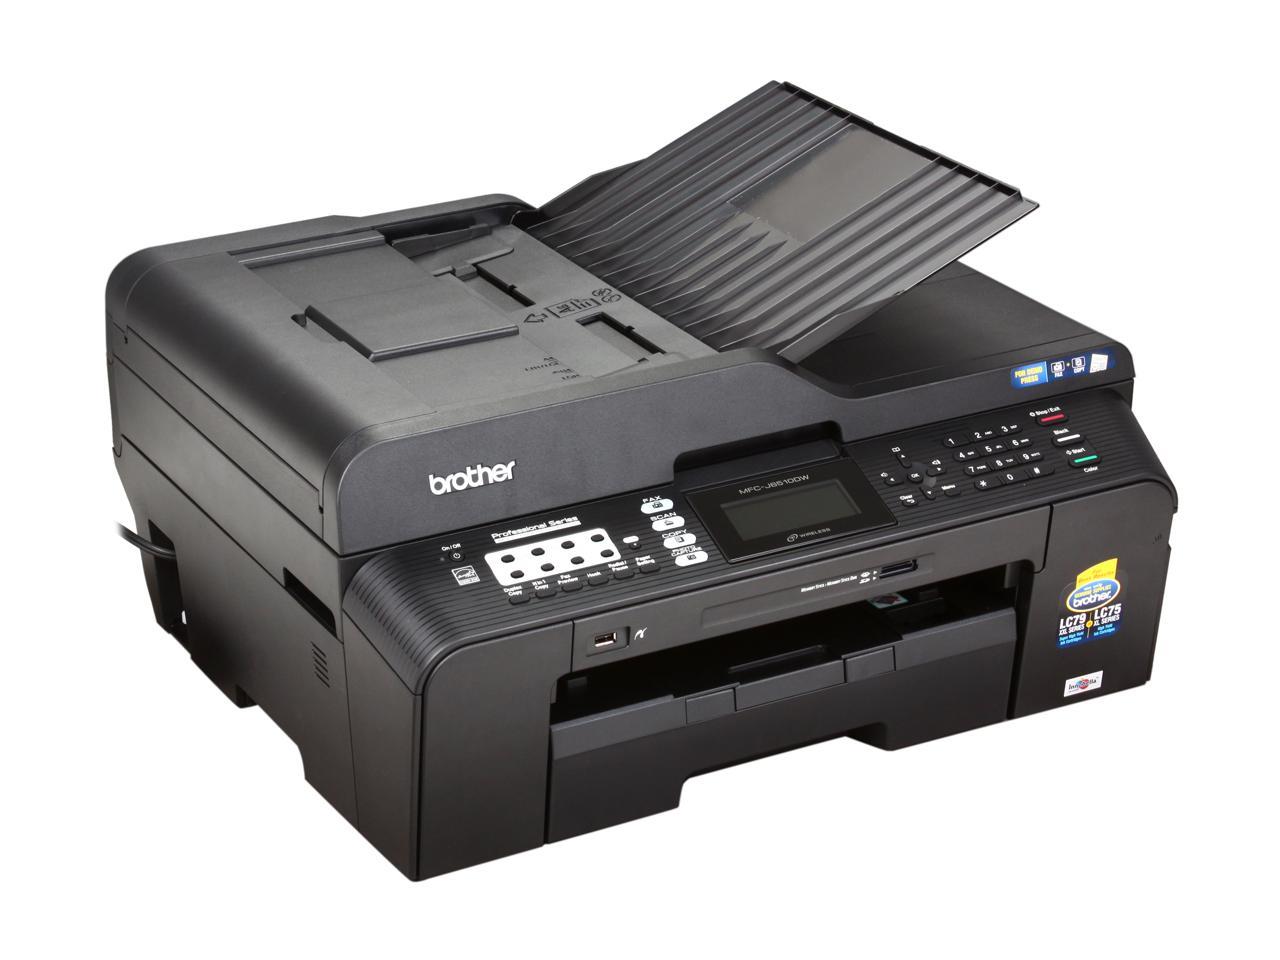 Brother Professional Series Mfc J6510dw Inkjet All In One Printer With Up To 11 X 17 Duplex 2443